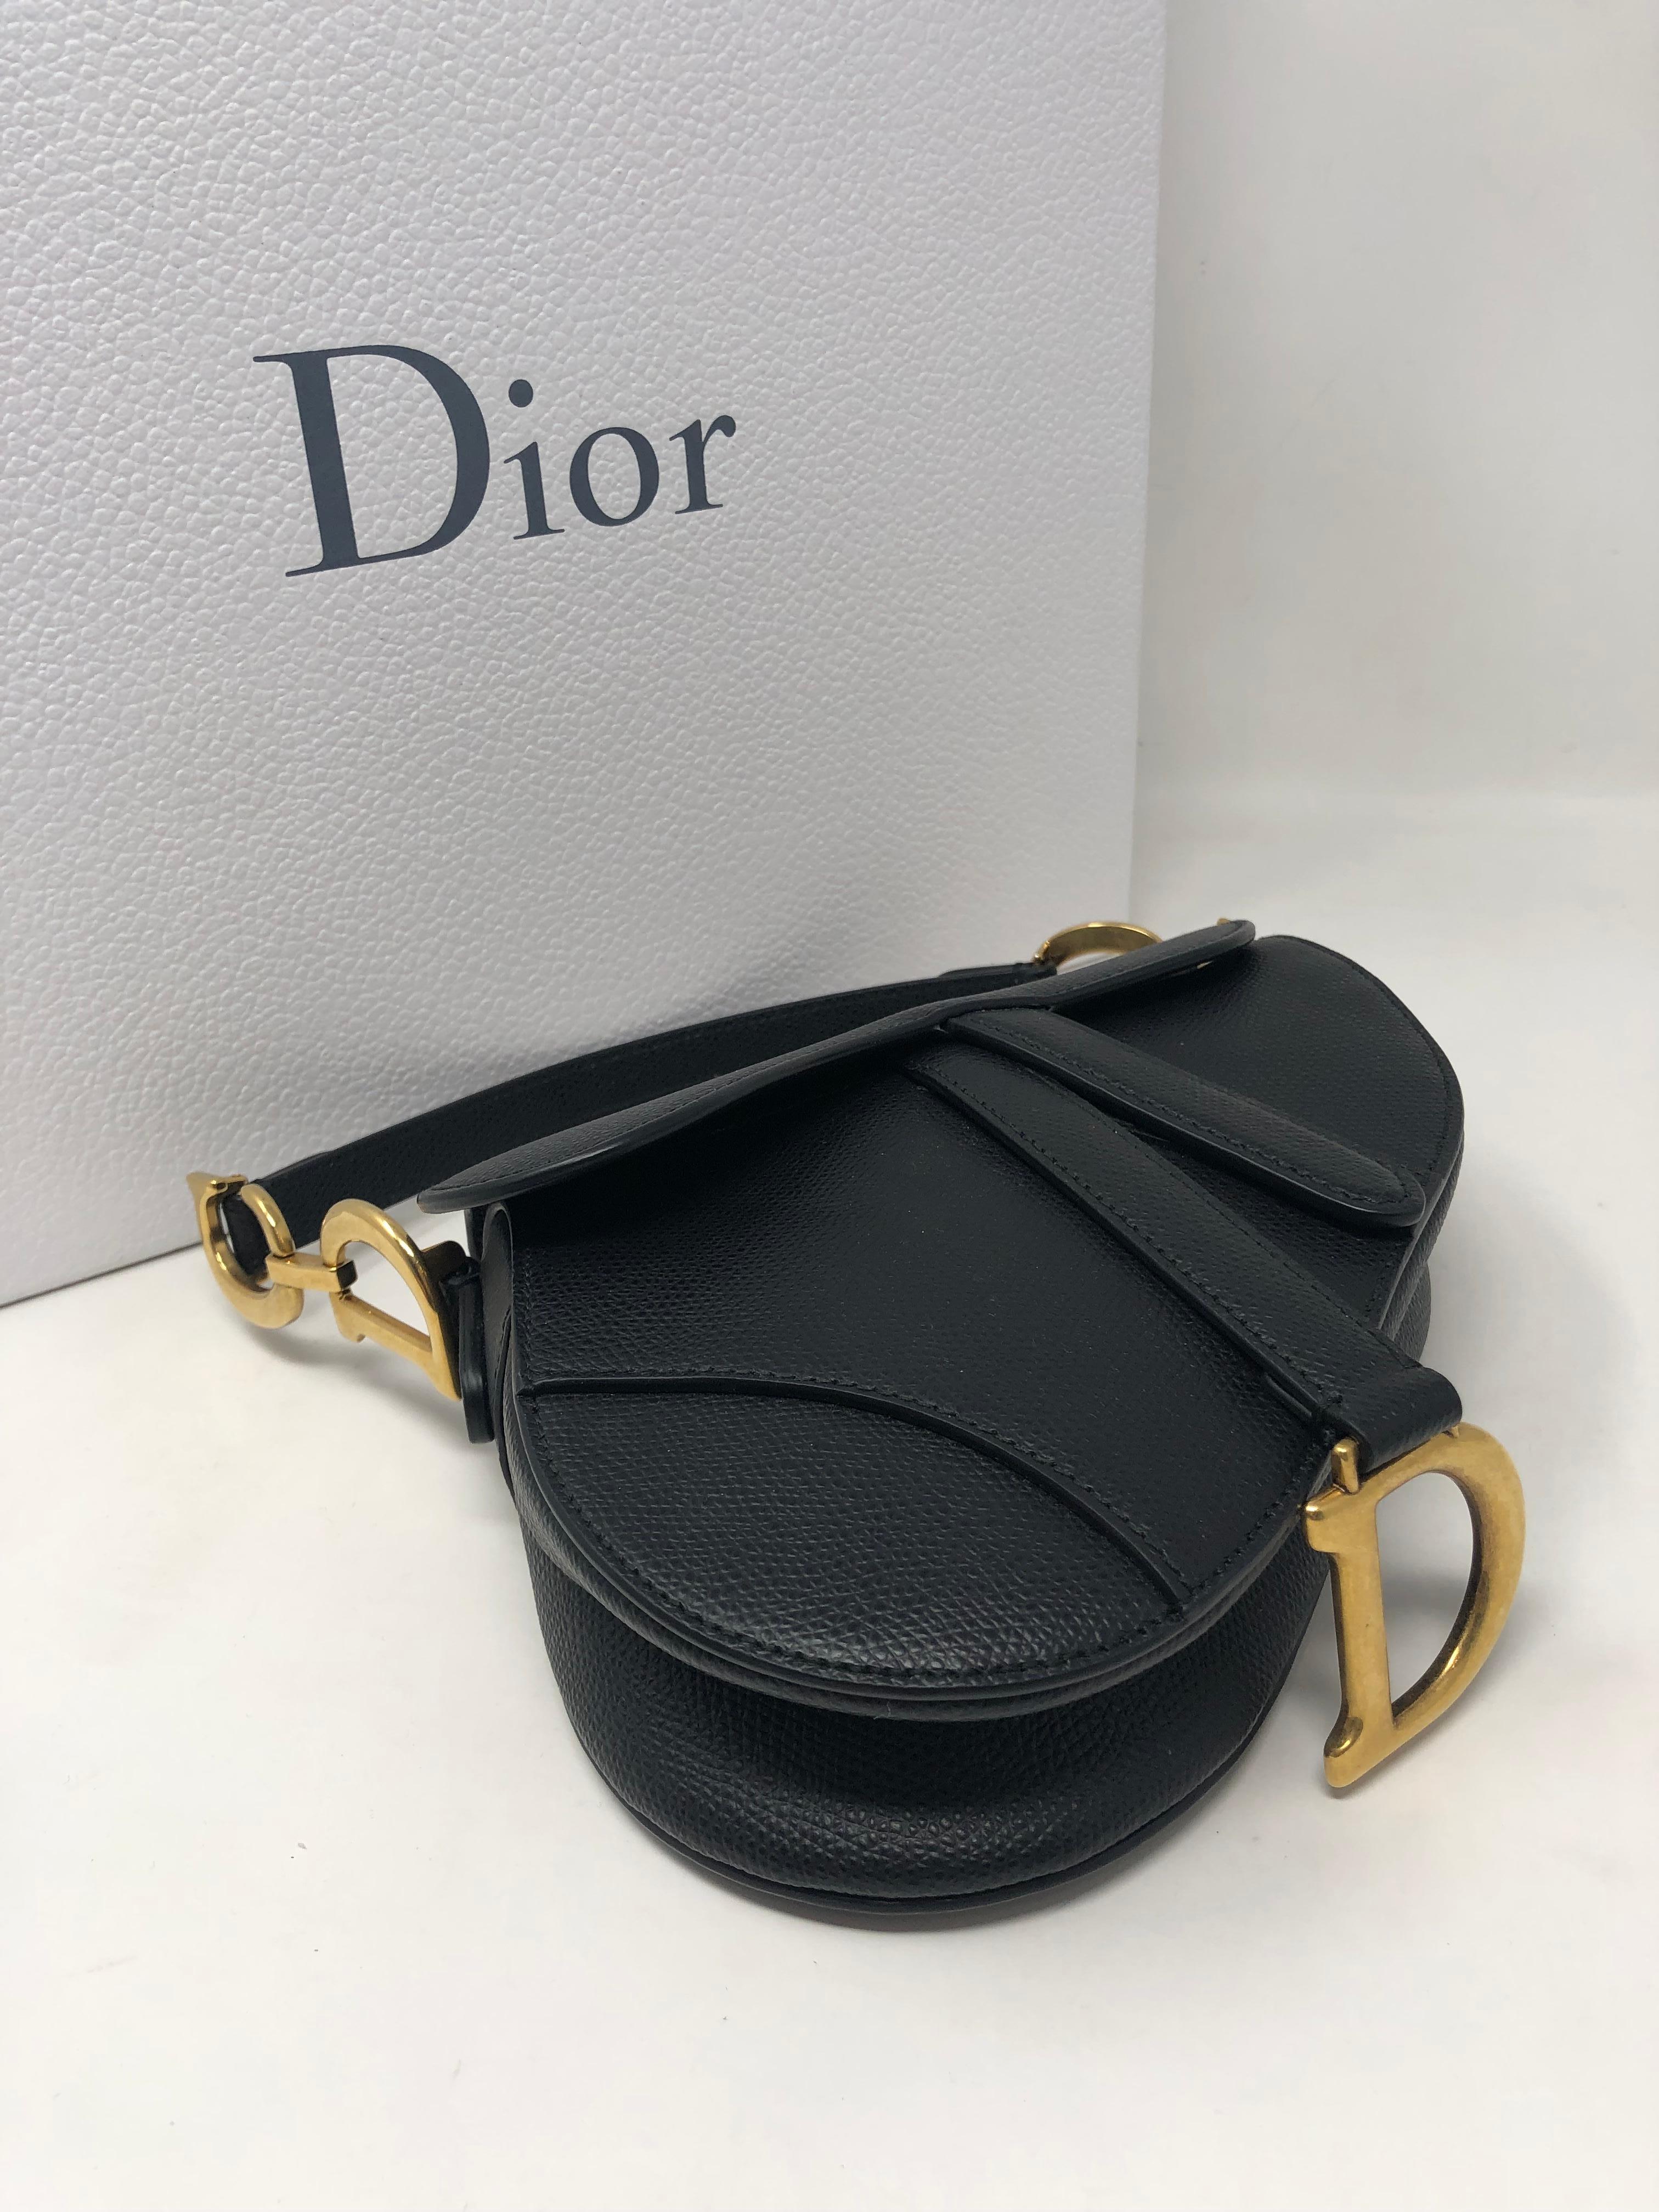 Dior Black Mini Saddle Bag. Mini size with gold hardware. Black calfskin leather. Never worn. Brand new with dust cover and box. Includes original receipt. Guaranteed authentic. 